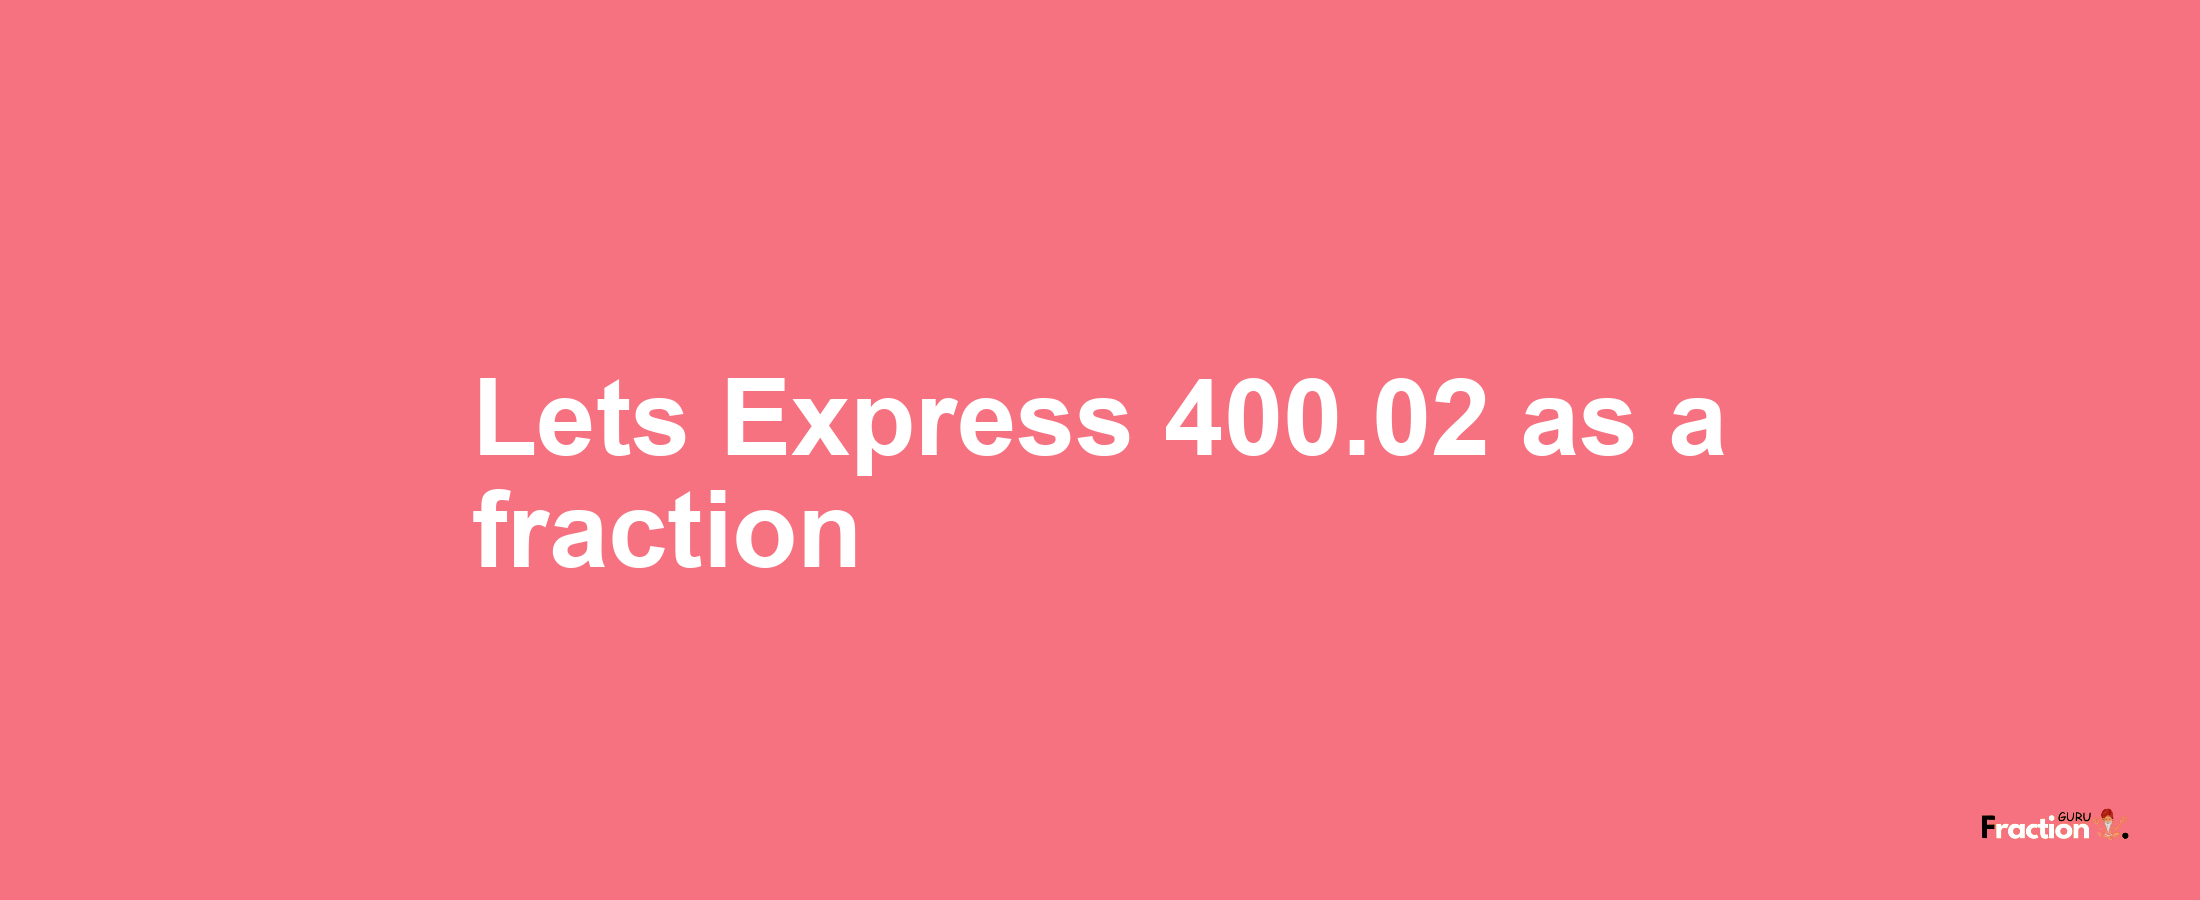 Lets Express 400.02 as afraction